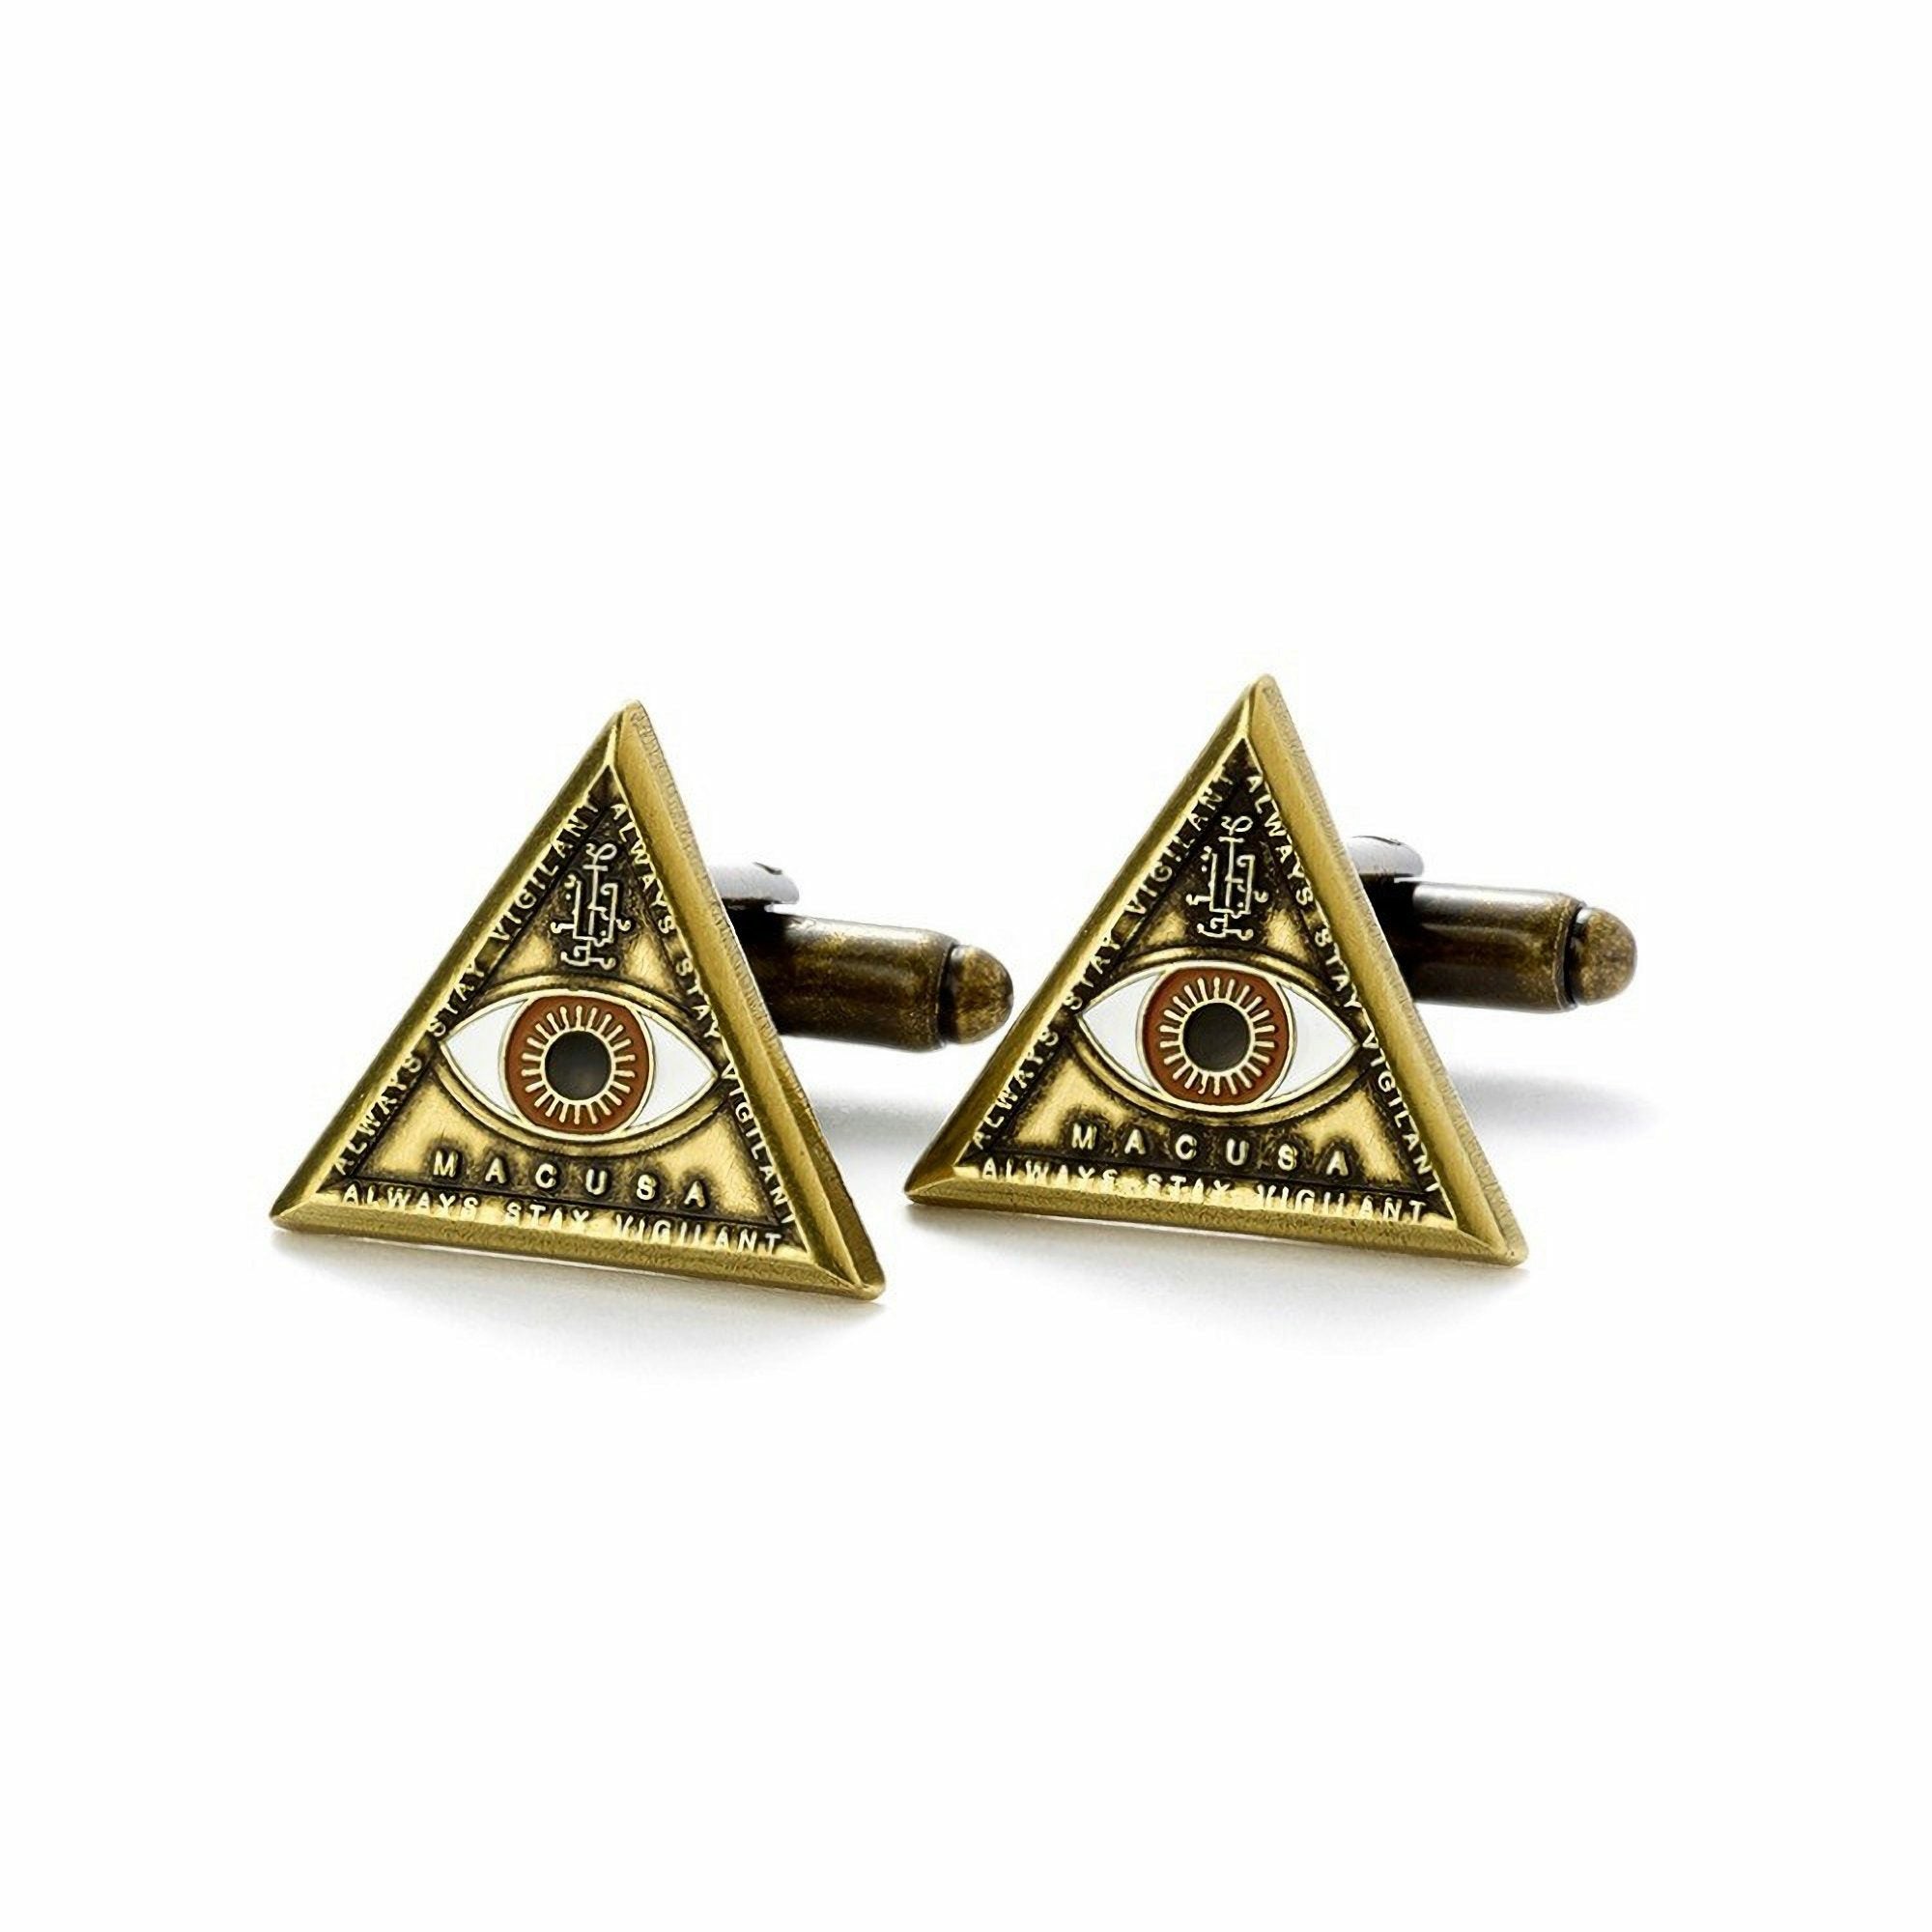 Fantastic Beasts and Where to Find Them MACUSA Triangle Eye Cufflinks